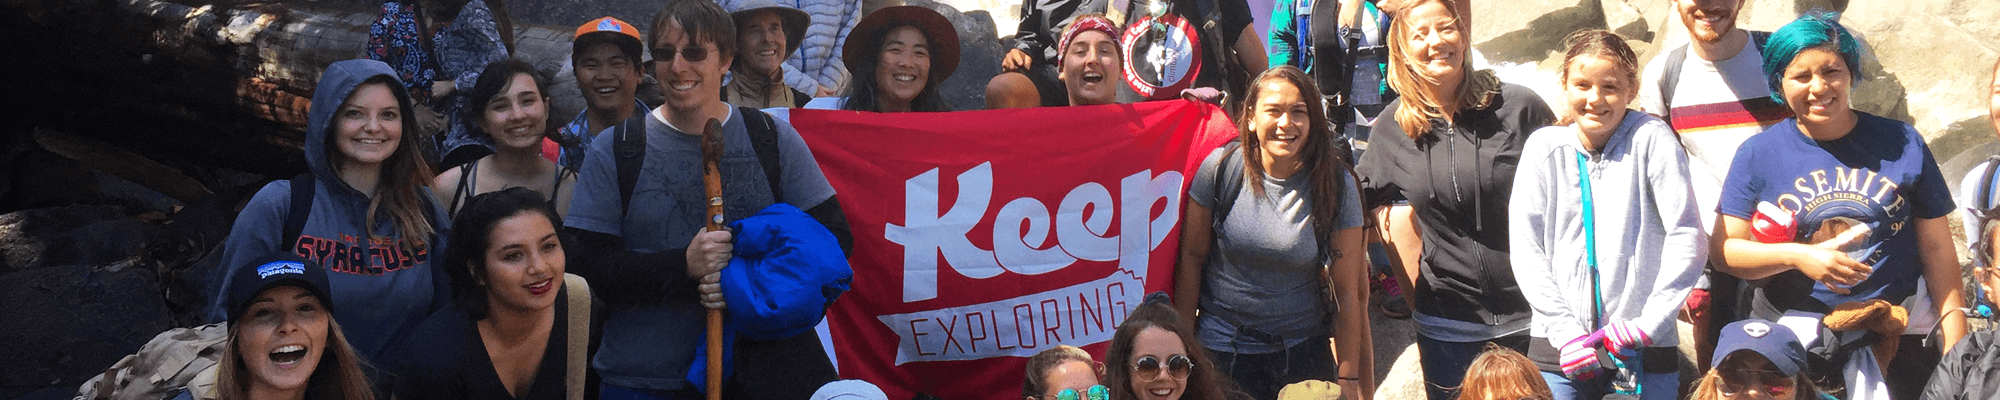 Geography field trip to Yosemite, group photo, banner being held that says Keep Exploring